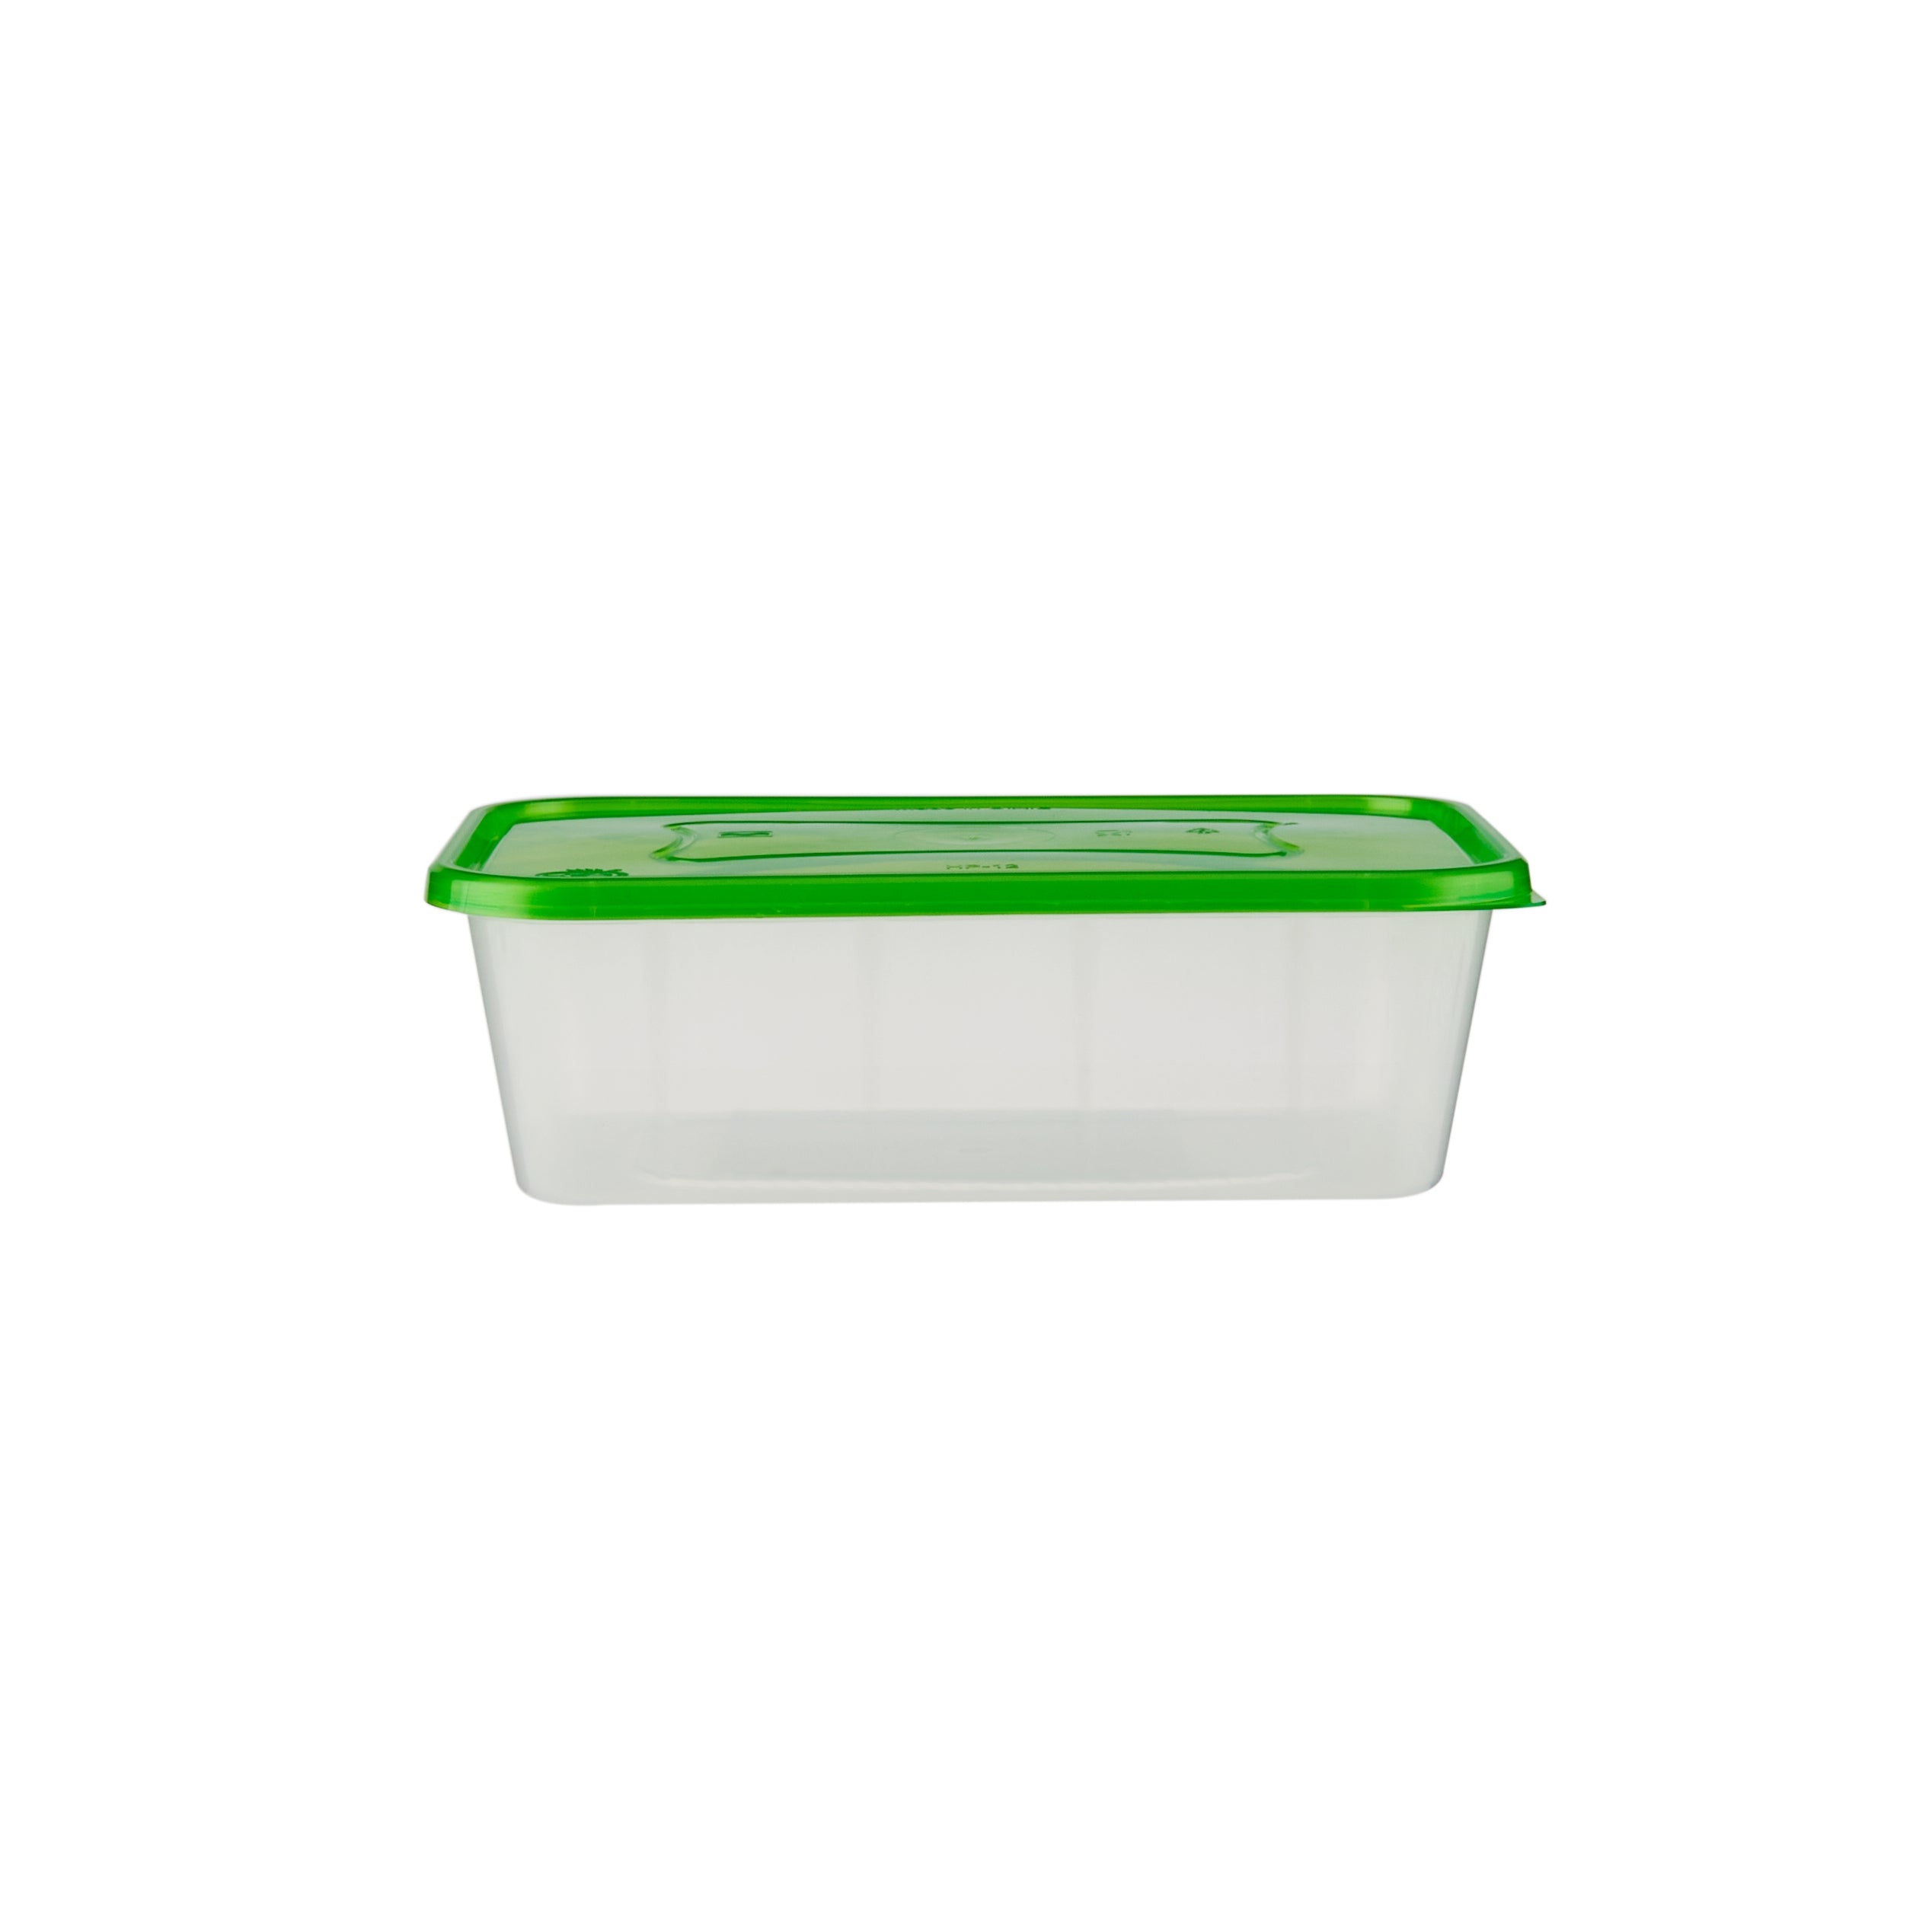 Clear Microwavable Rectan Container with color Lids